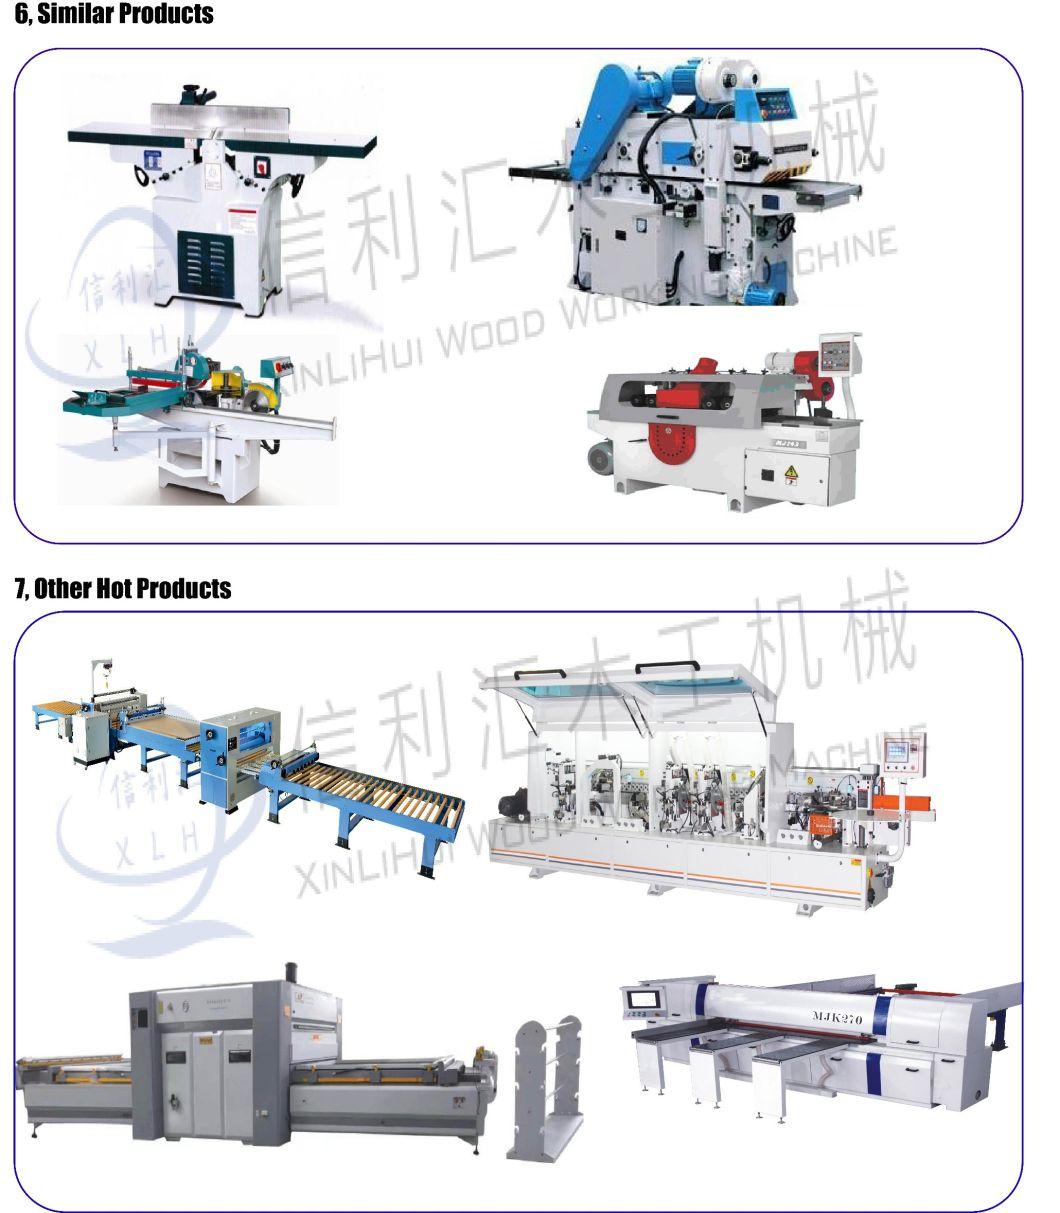 Mx5068 Woodworking High Speed Spindle Moulder Wood Shaper Machine/ High Speed Router Profile Copy Router Machine/ CNC Router Machine Mini Desktop CNC Router